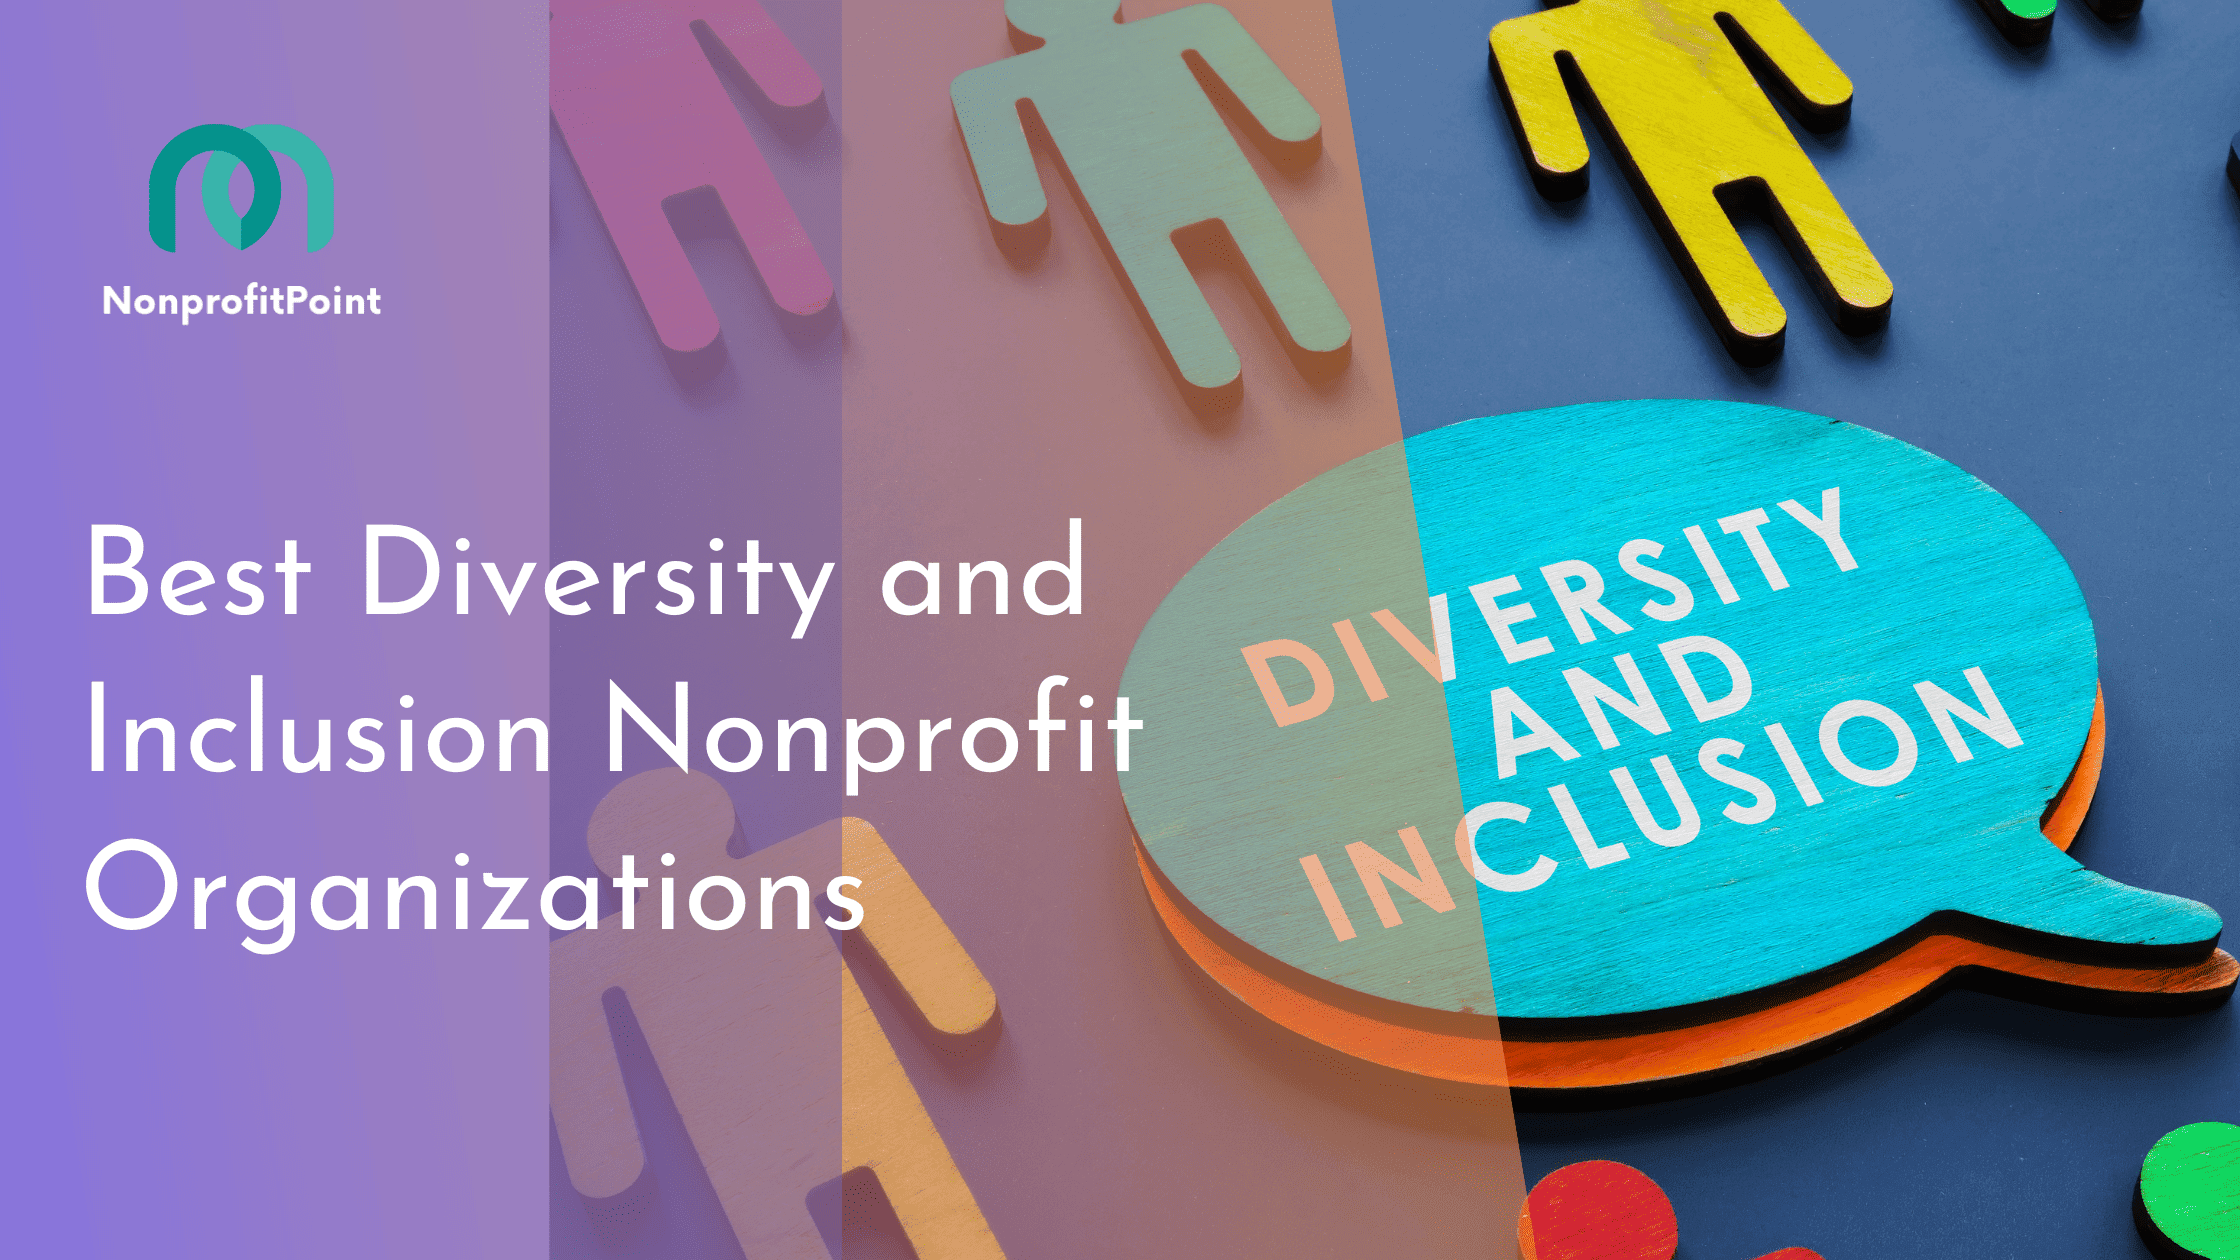 Best Diversity and Inclusion Nonprofit Organizations